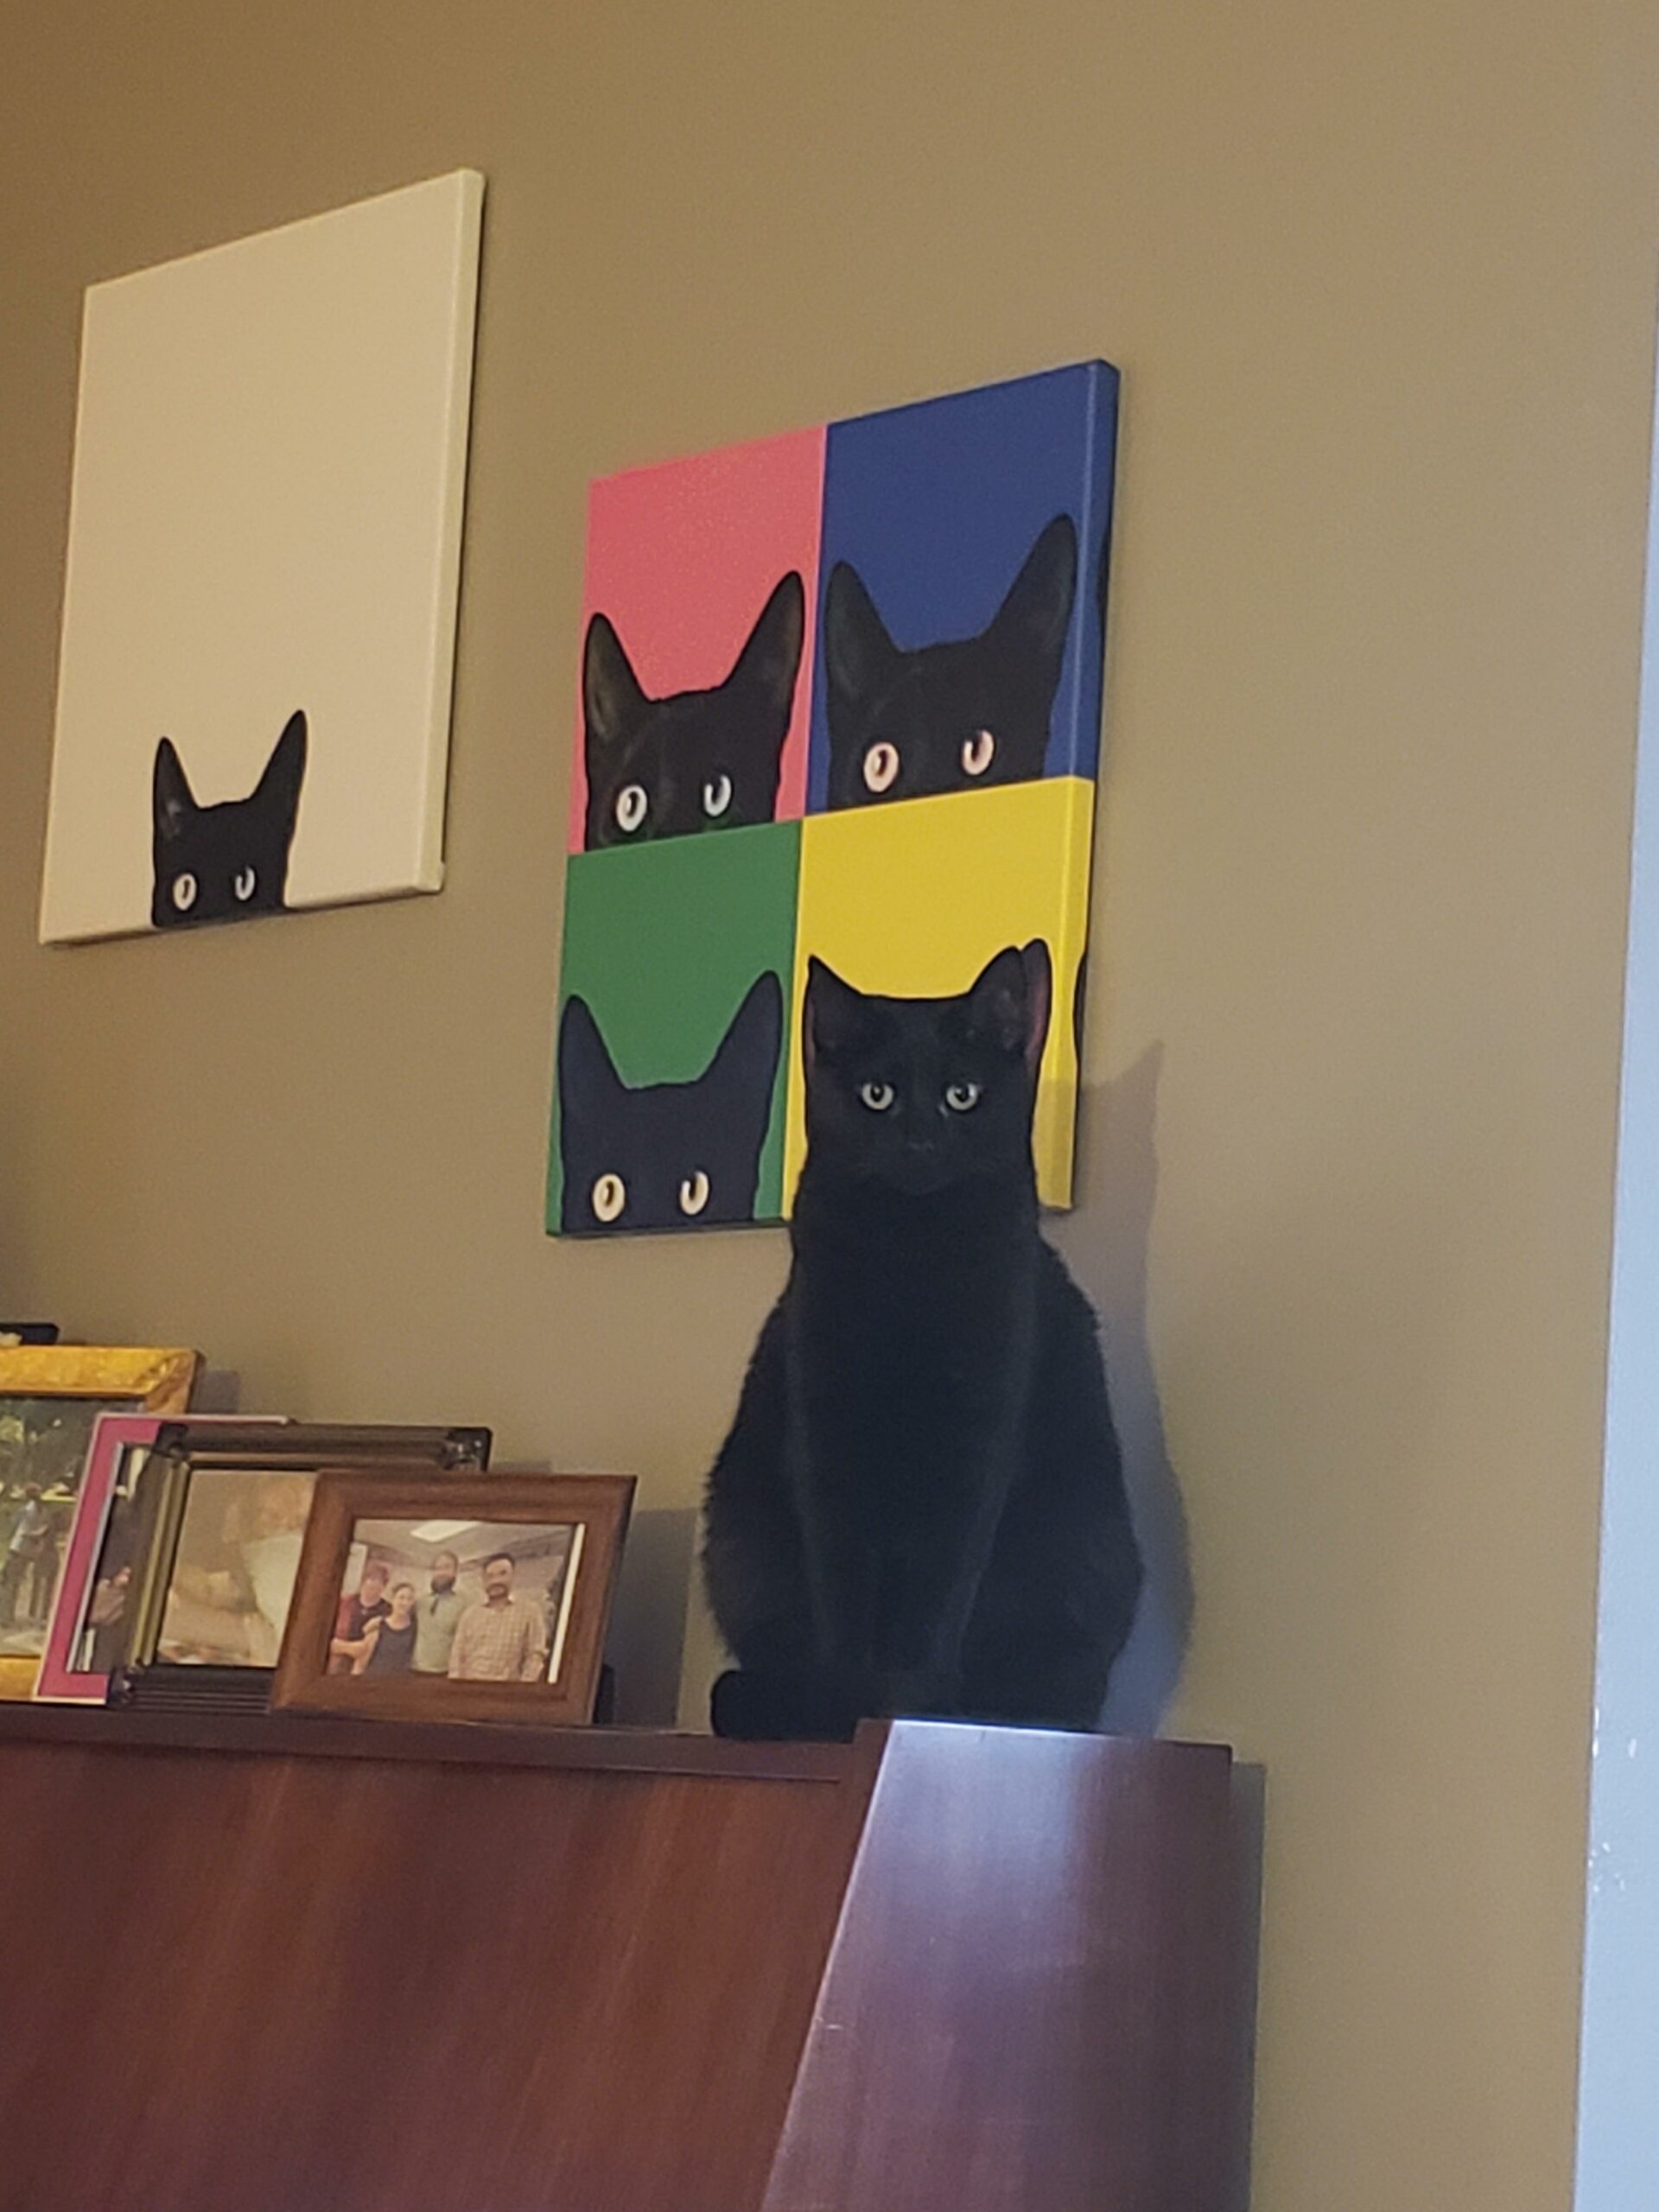 black cat sitting in front of artwork featuring a black cat